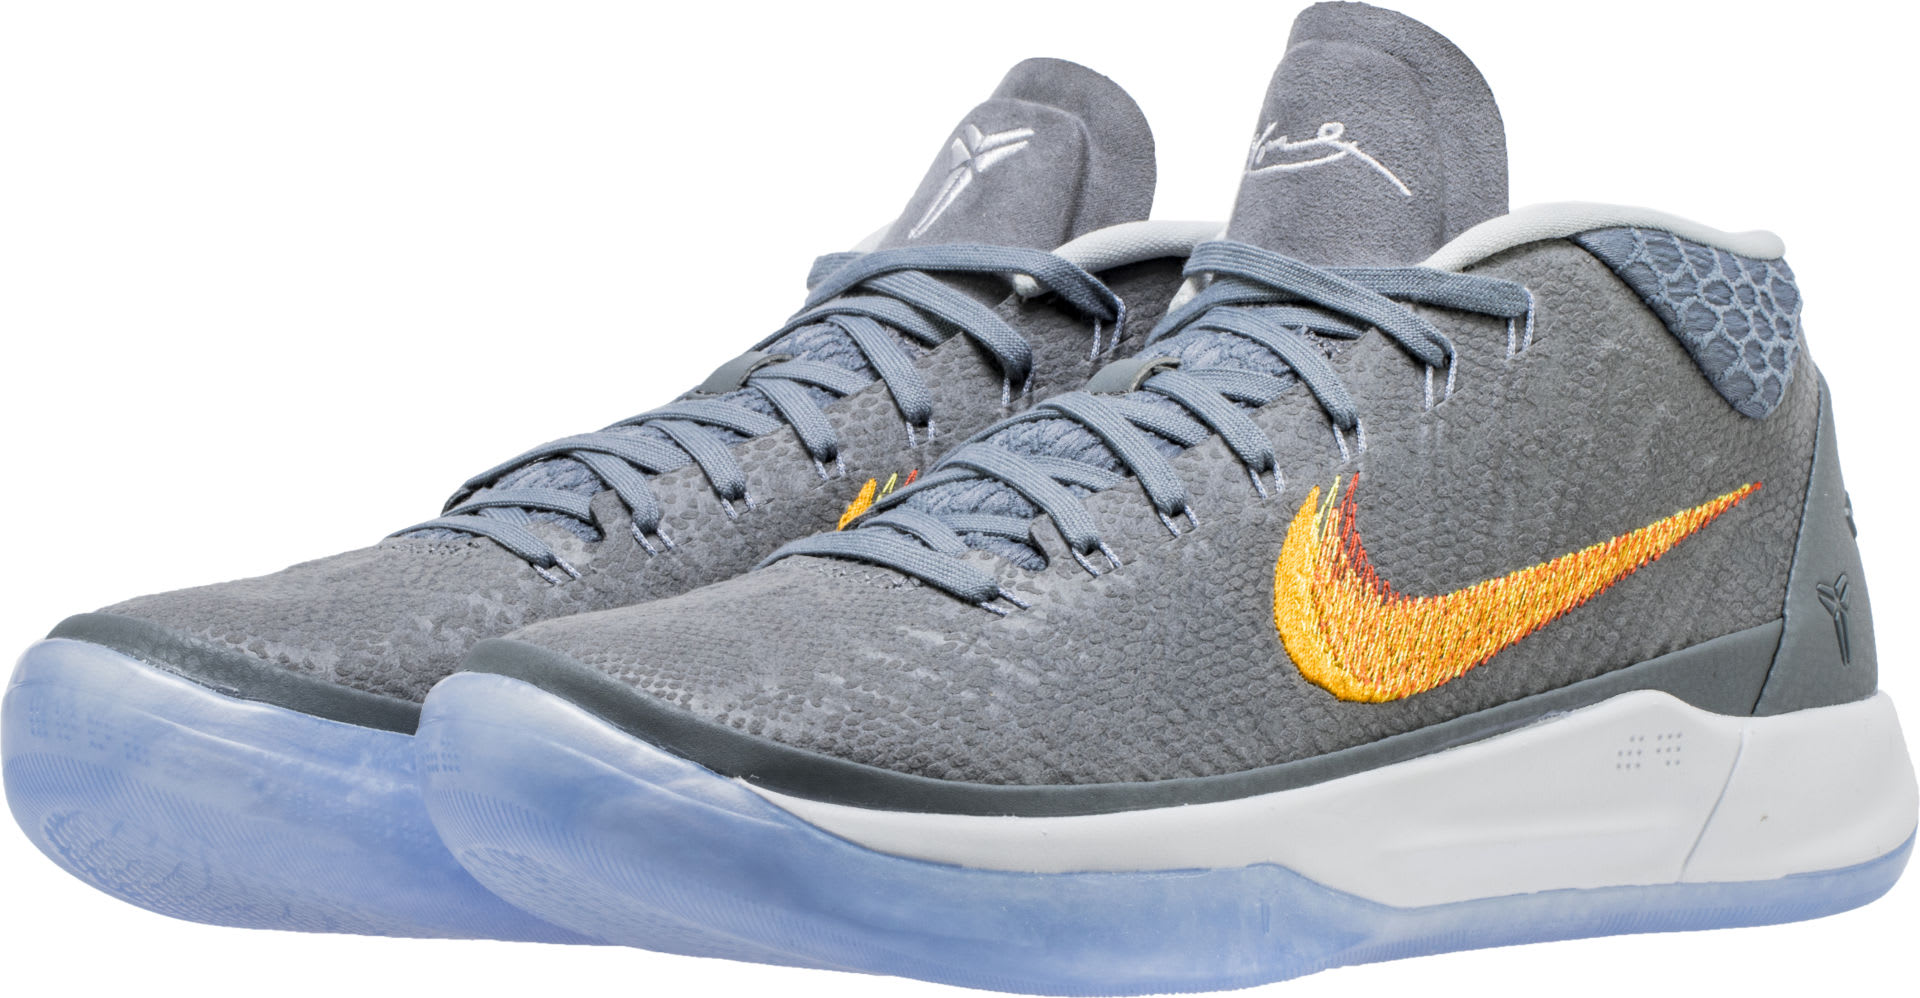 Nike Kobe A.D. Mid Chrome Release Date 922482-005 Front